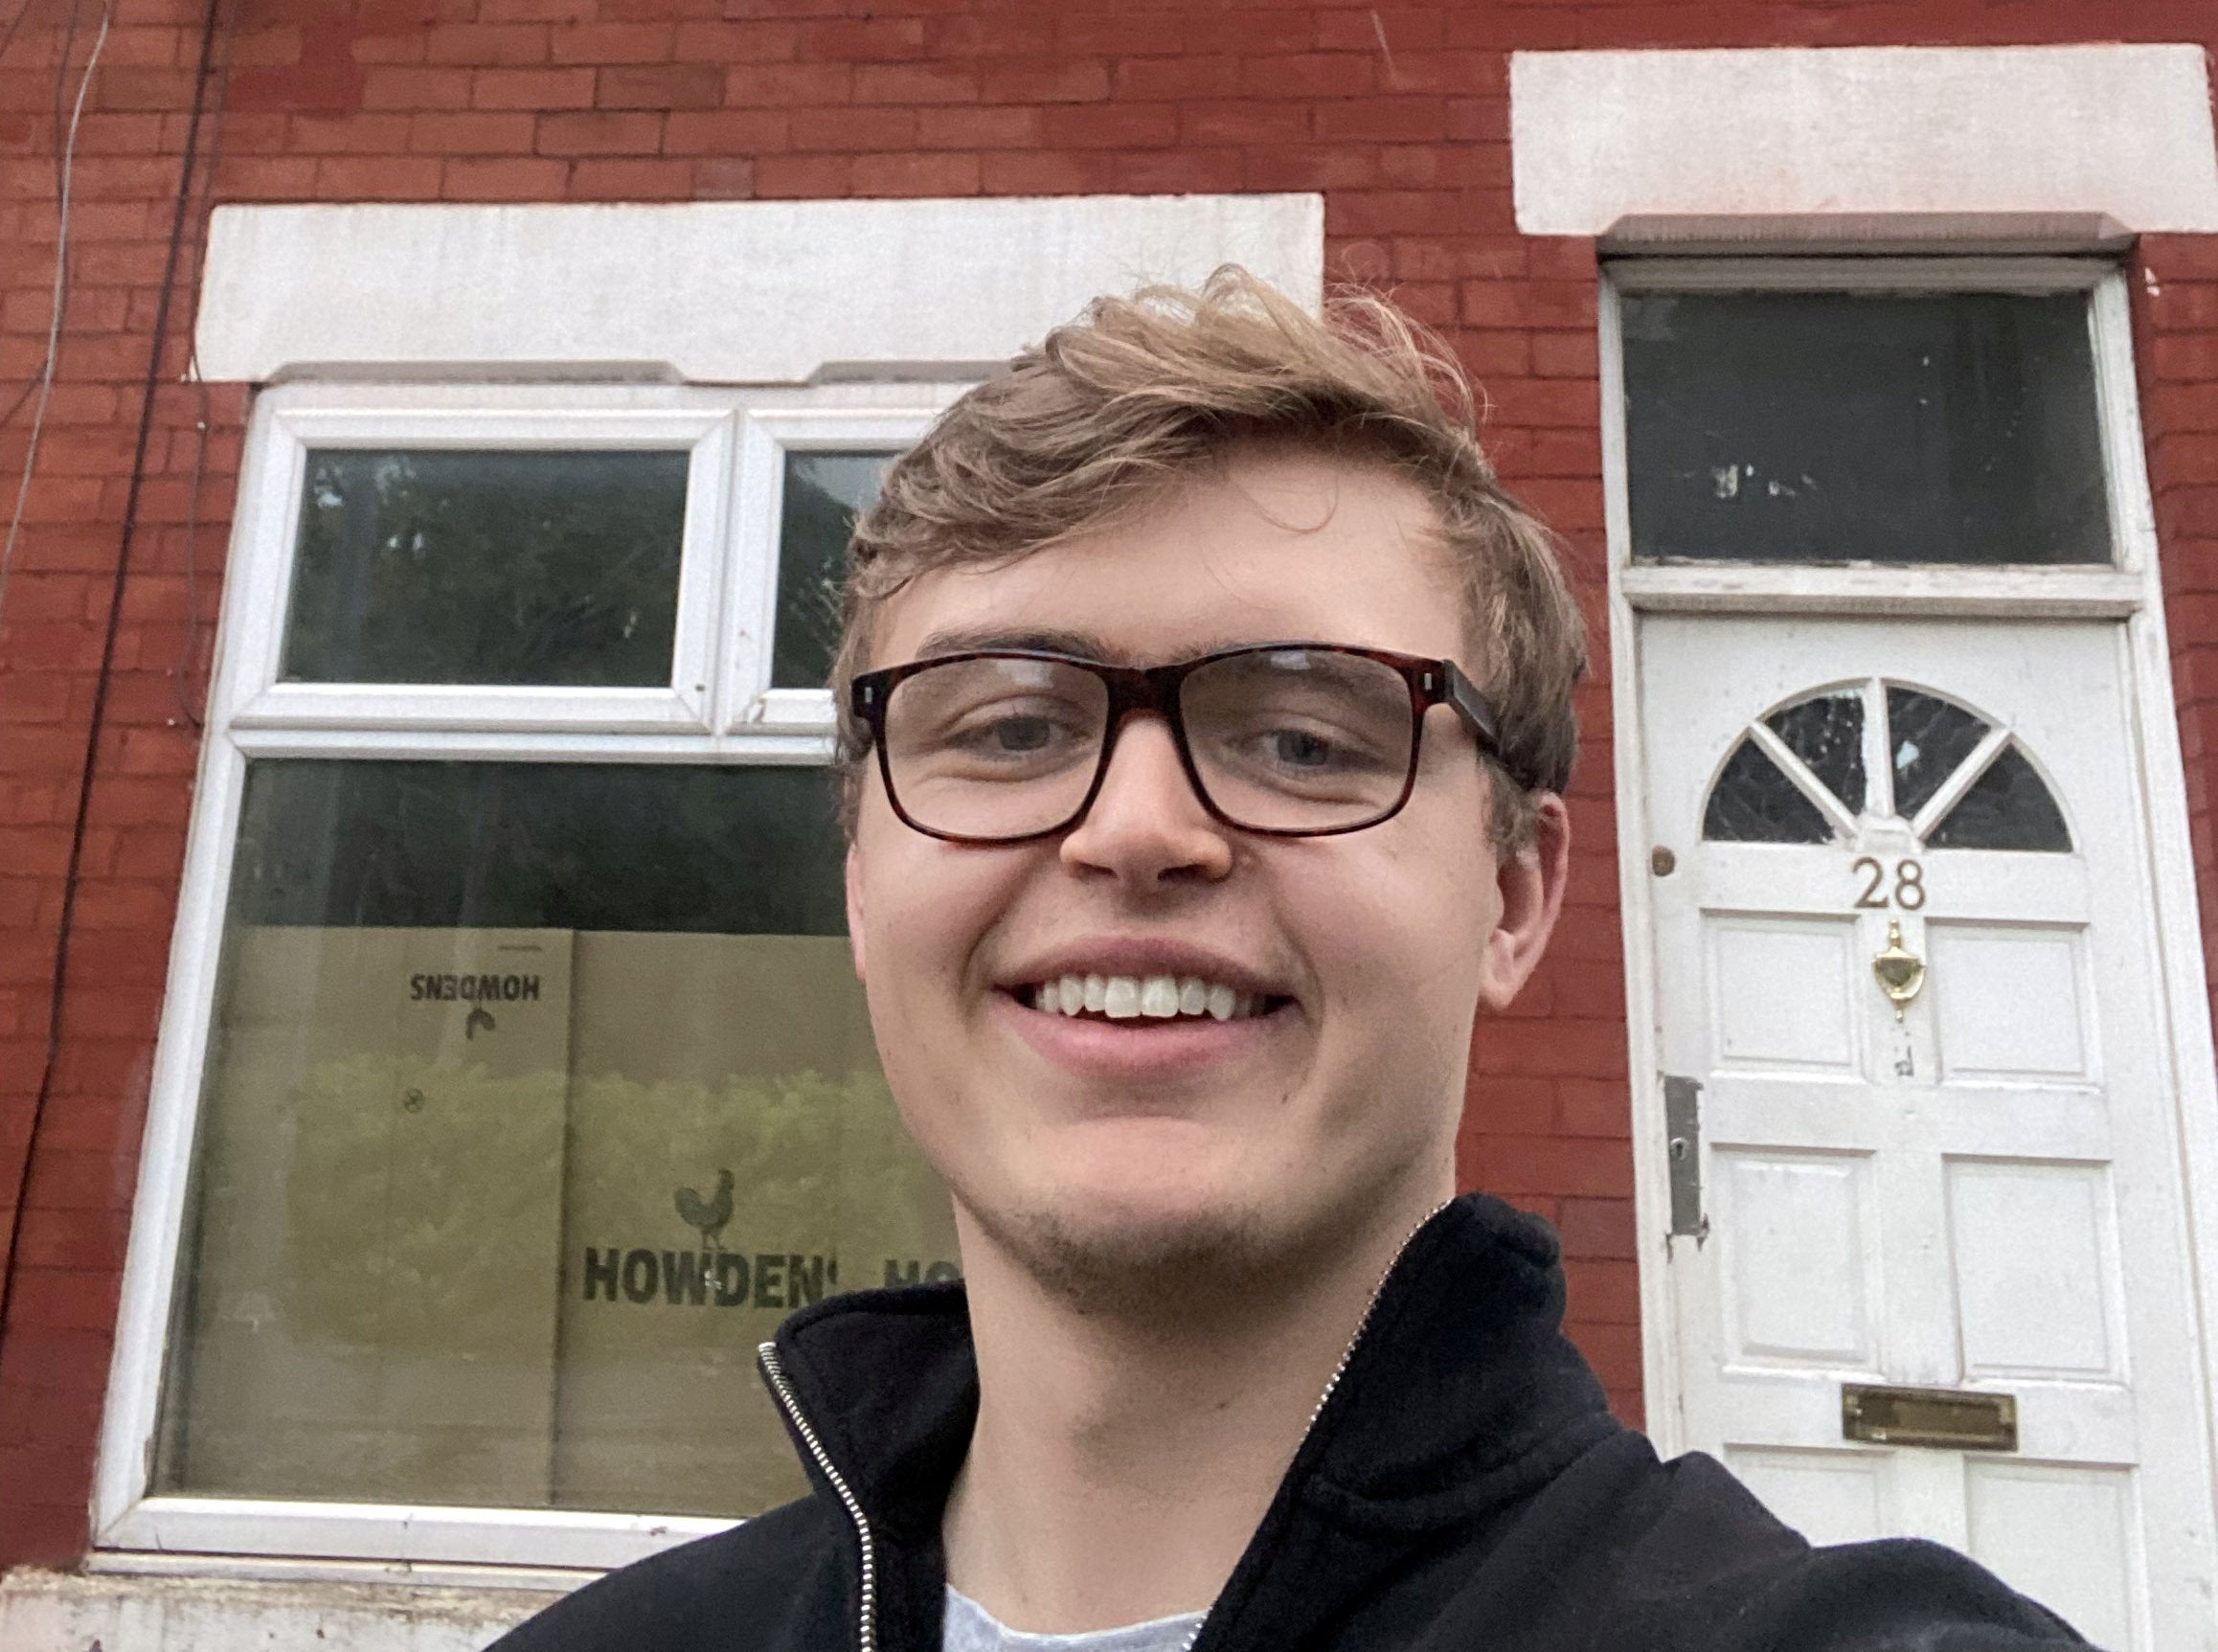 Josh Parrott bought his first house when he was 19 years old